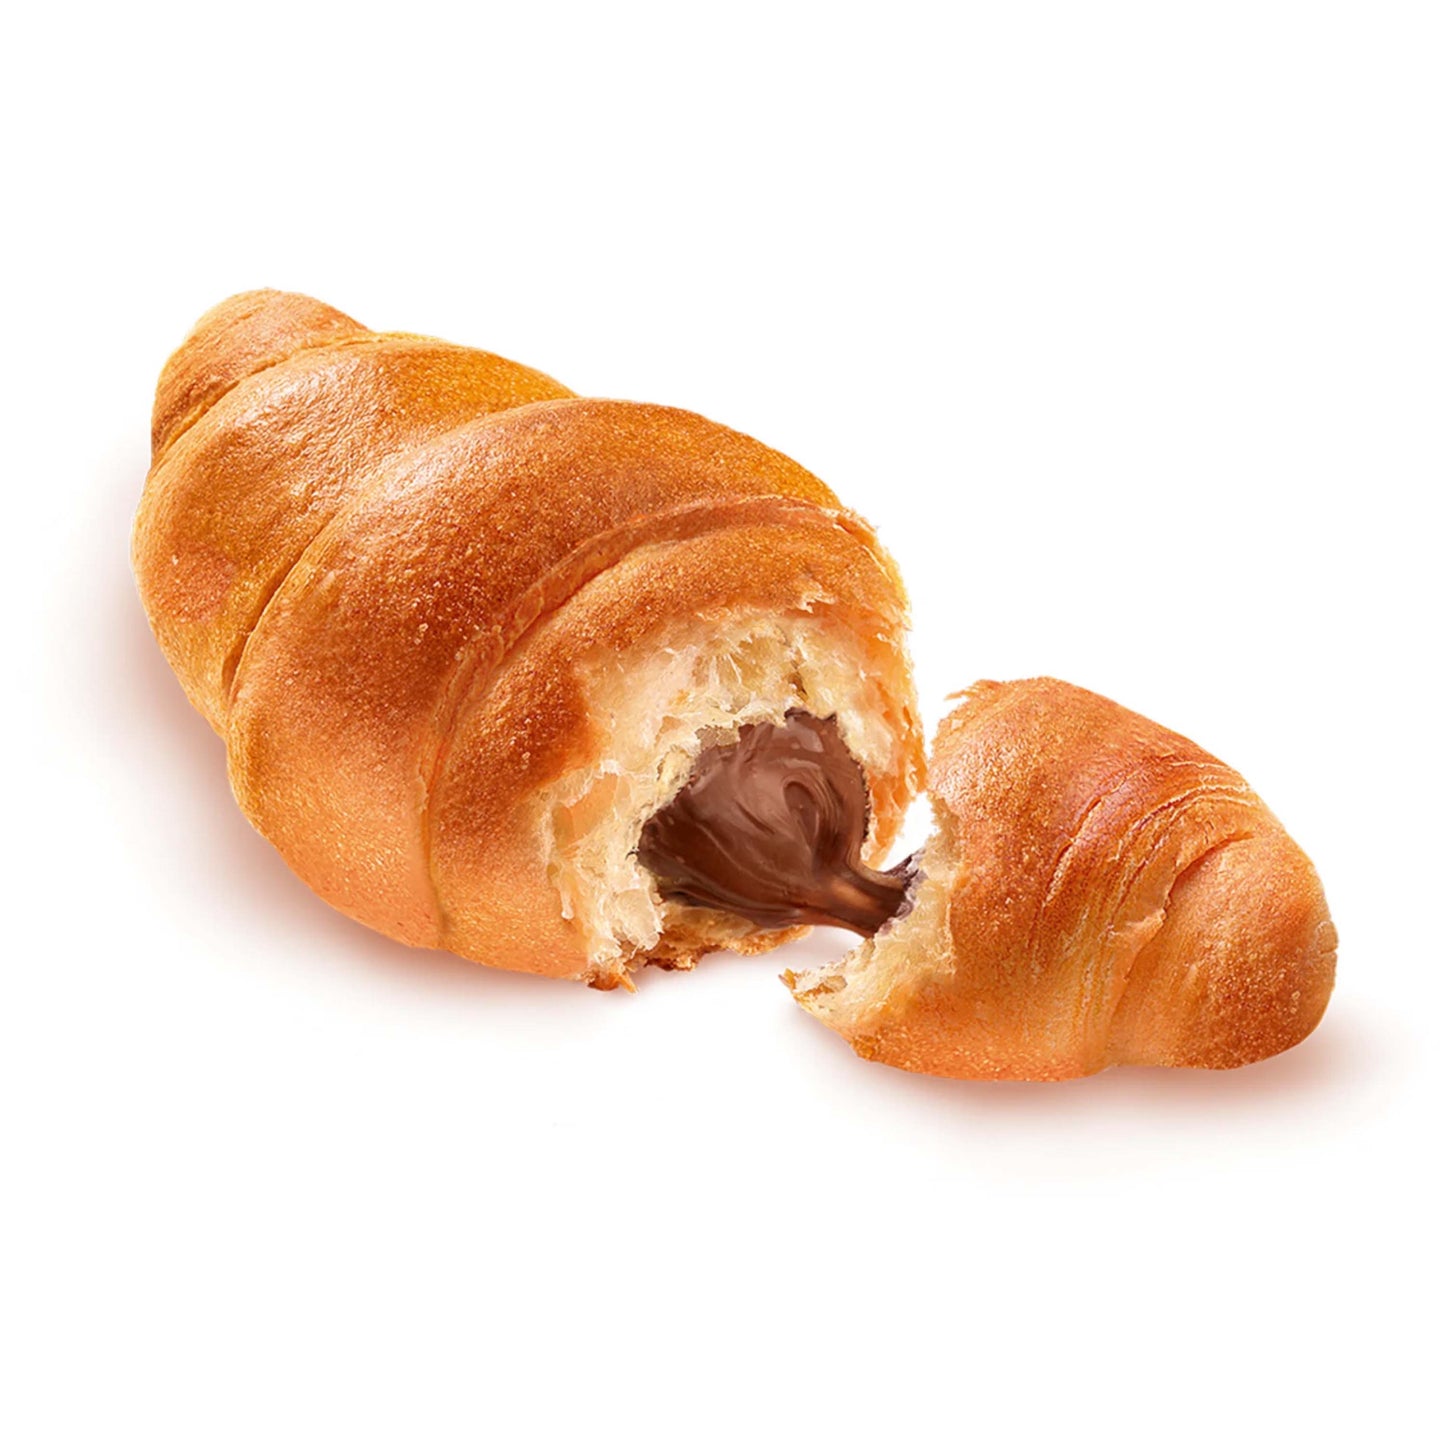 7 Days Croissant with Cocoa Filling Mах - 80g - Croissant Snacks